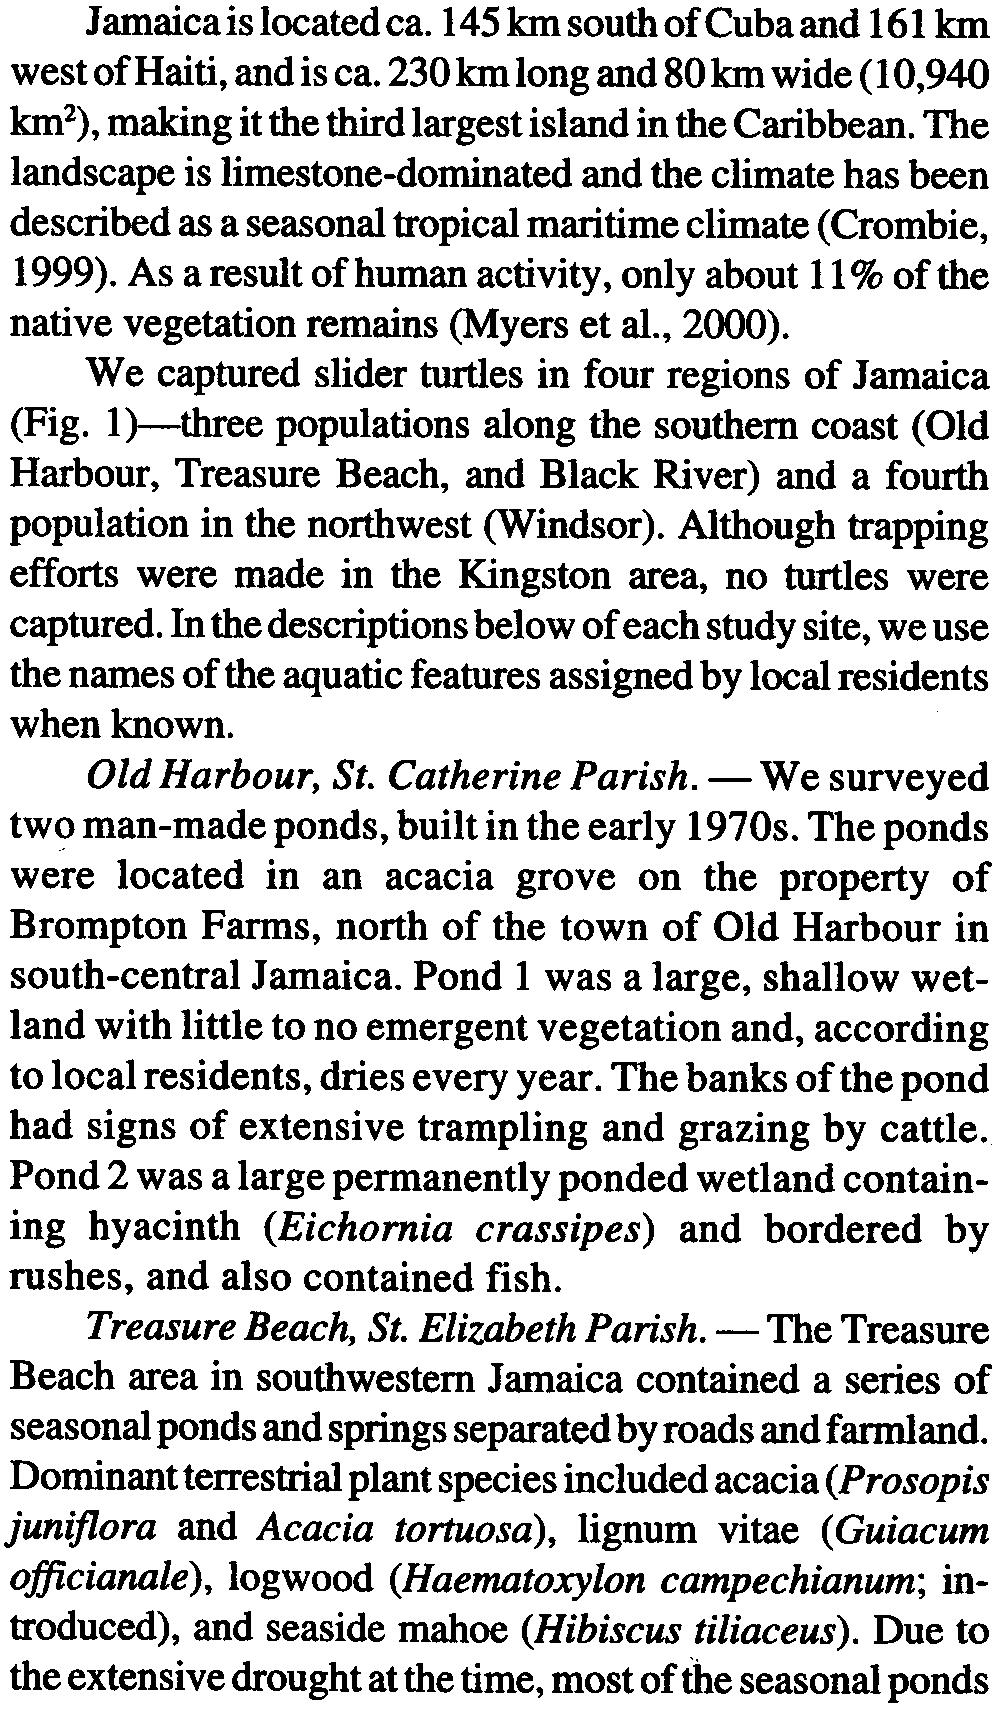 terrapen, but have instead focused on phylogenetic relationships between T. terrapen and other West Indian Trachemys (Seidel and Adkins, 1987; Seidel, 1996).